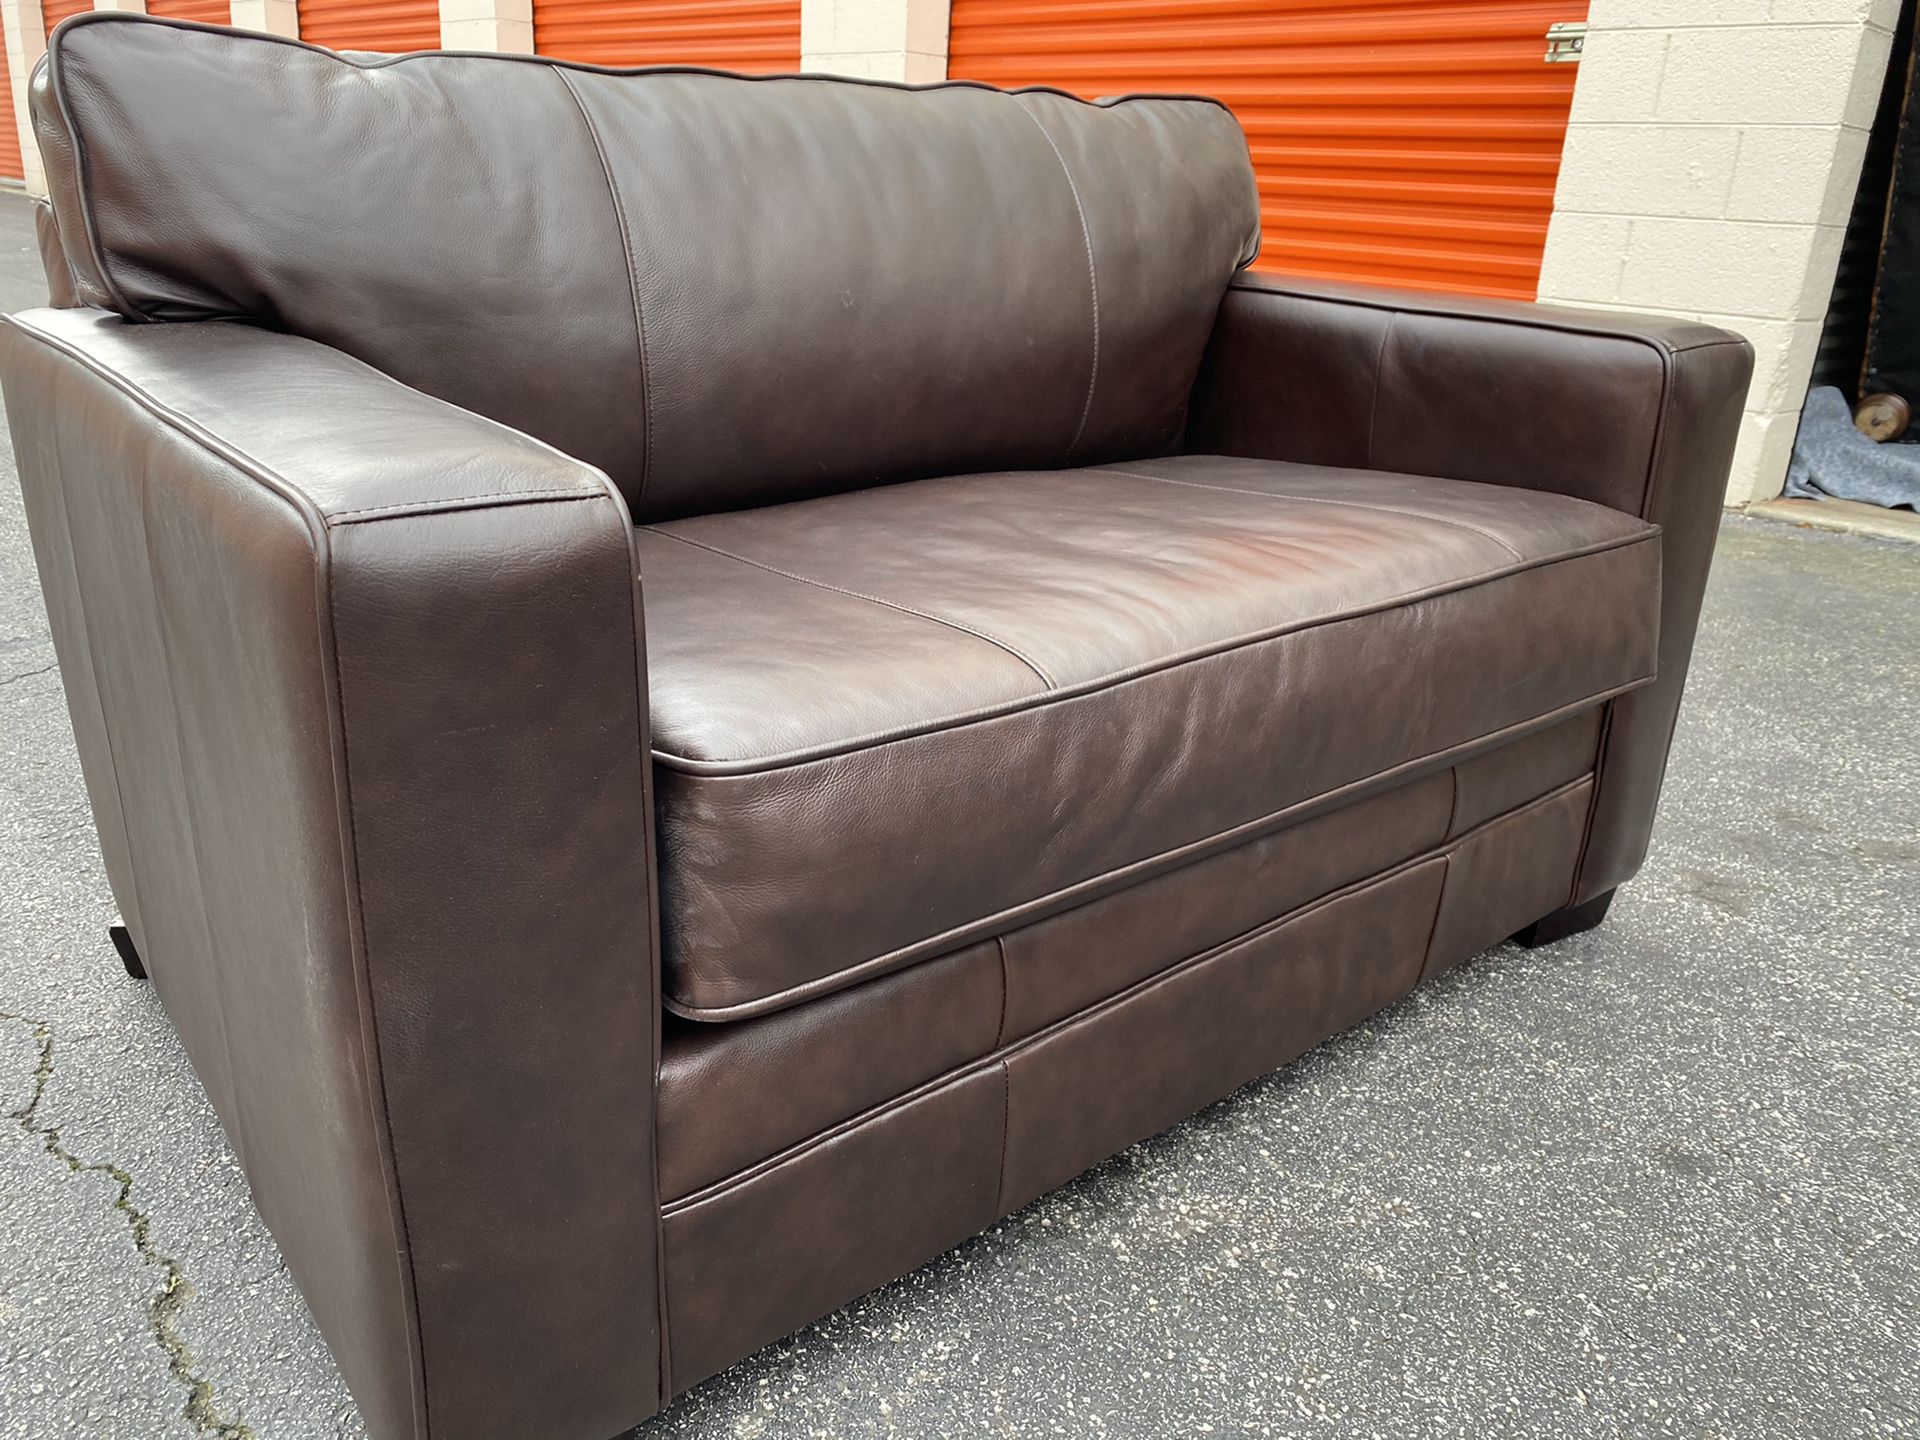 Havertys Leather pullout sleeper